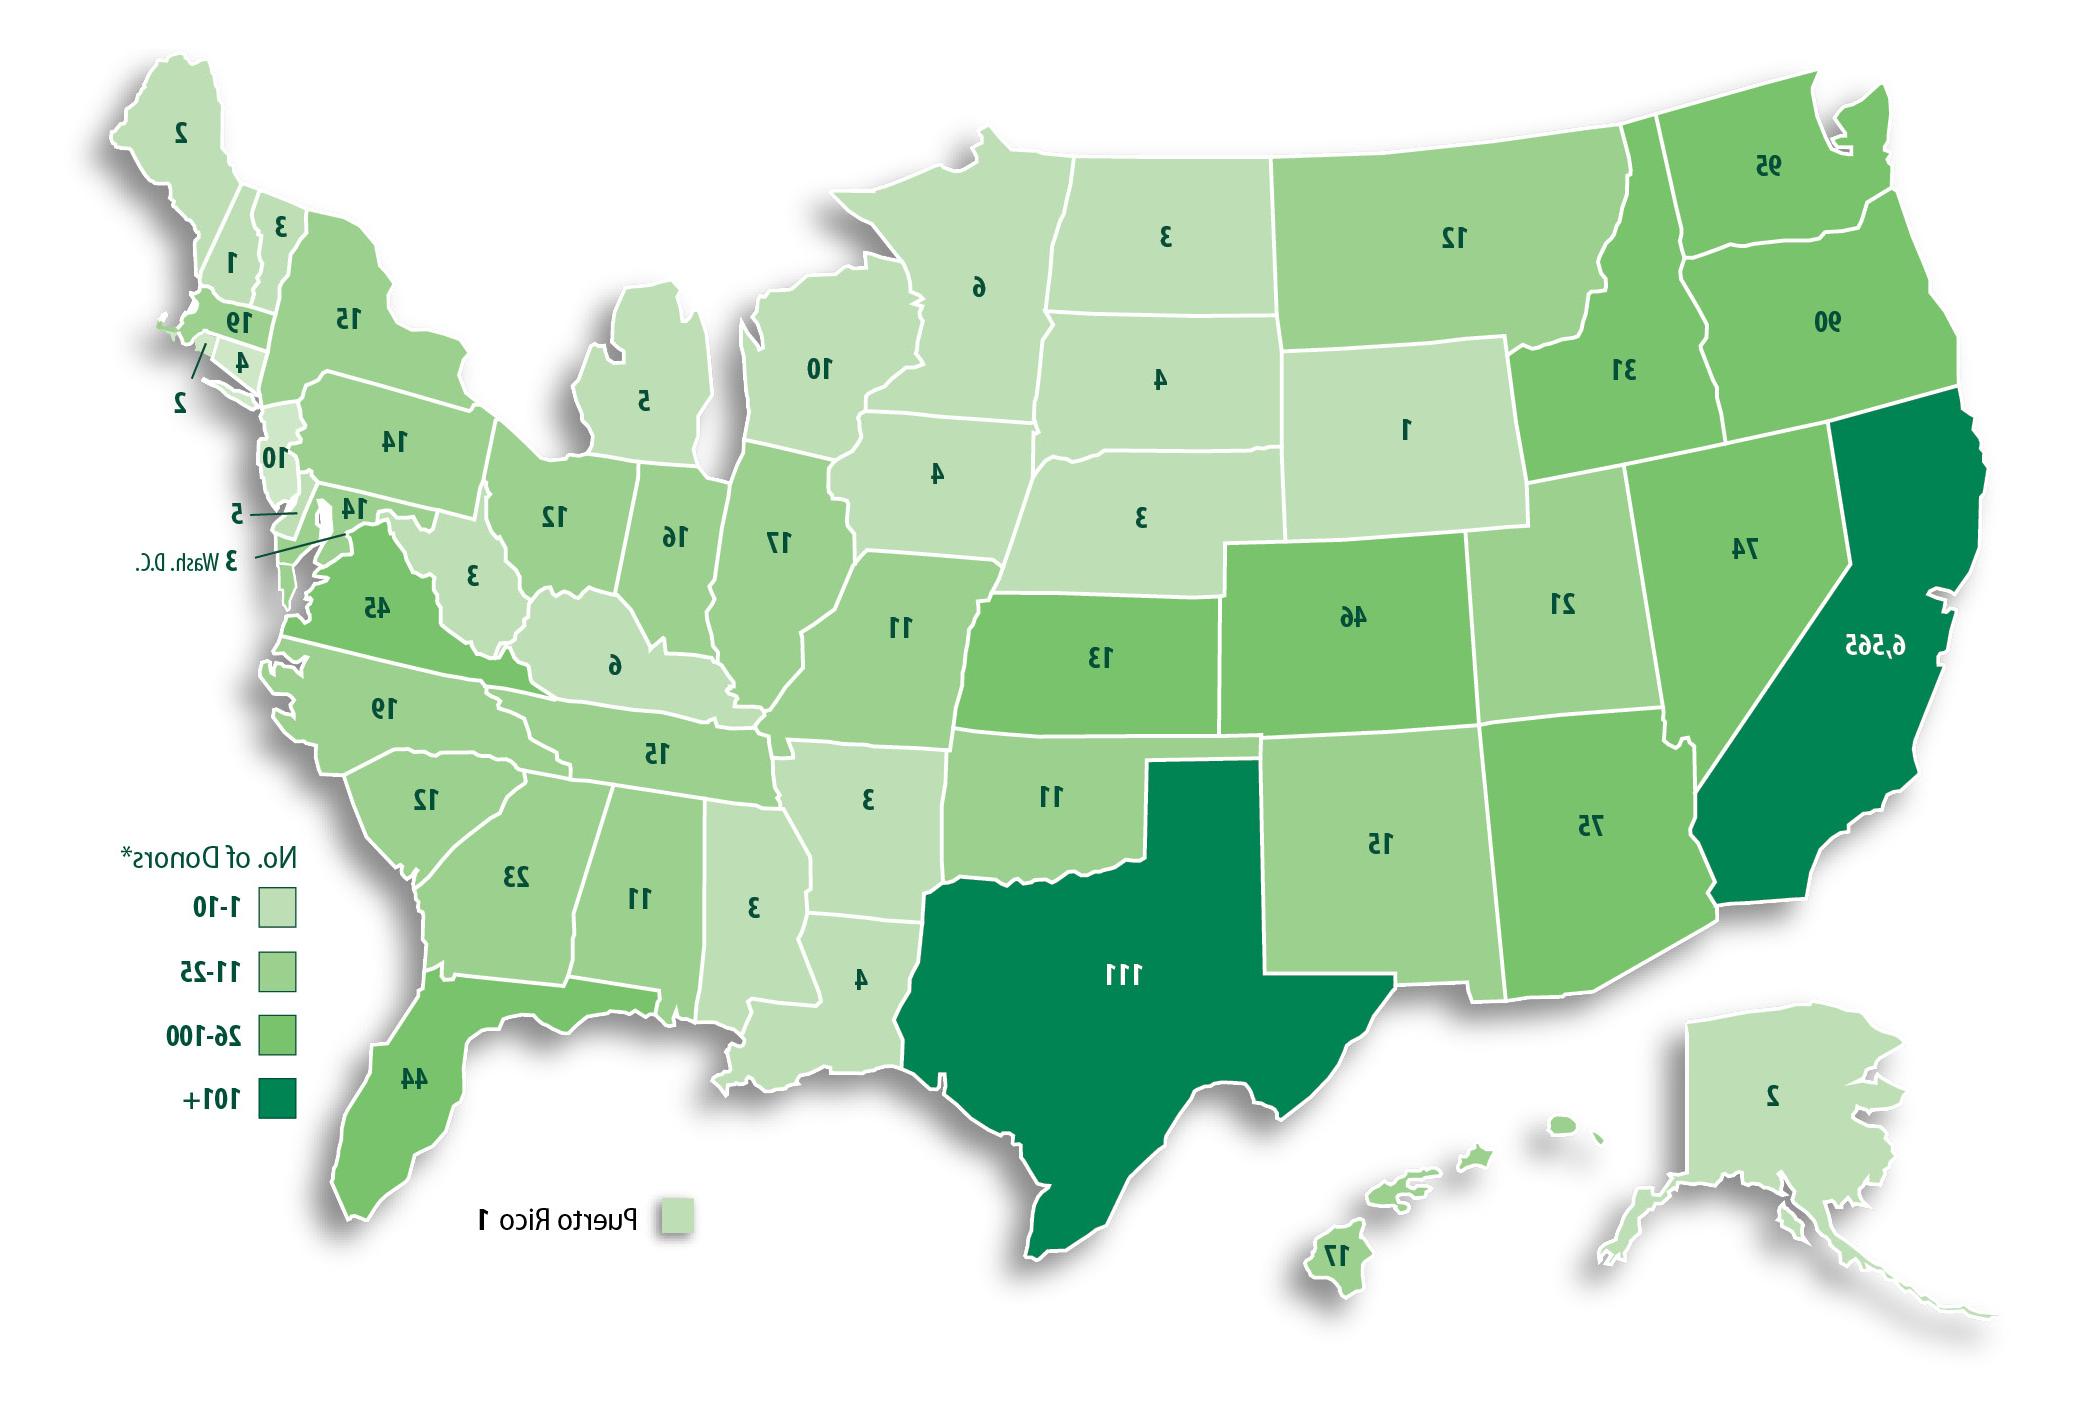 U.S. map showing alumni donations from every state